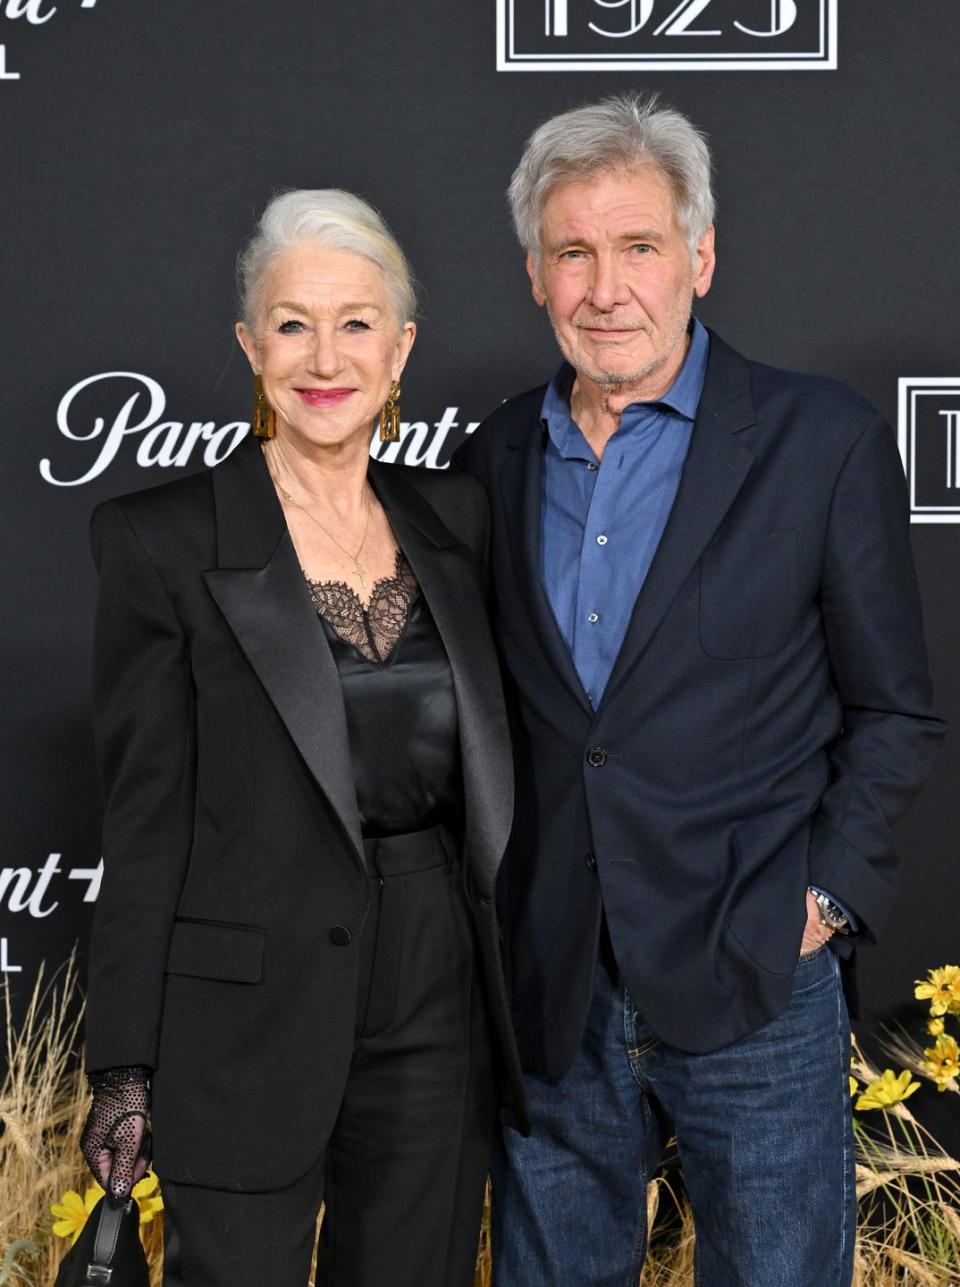 los angeles, california december 02 helen mirren and harrison ford attend the los angeles premiere of paramounts 1923 at hollywood american legion on december 02, 2022 in los angeles, california photo by axellebauer griffinfilmmagic